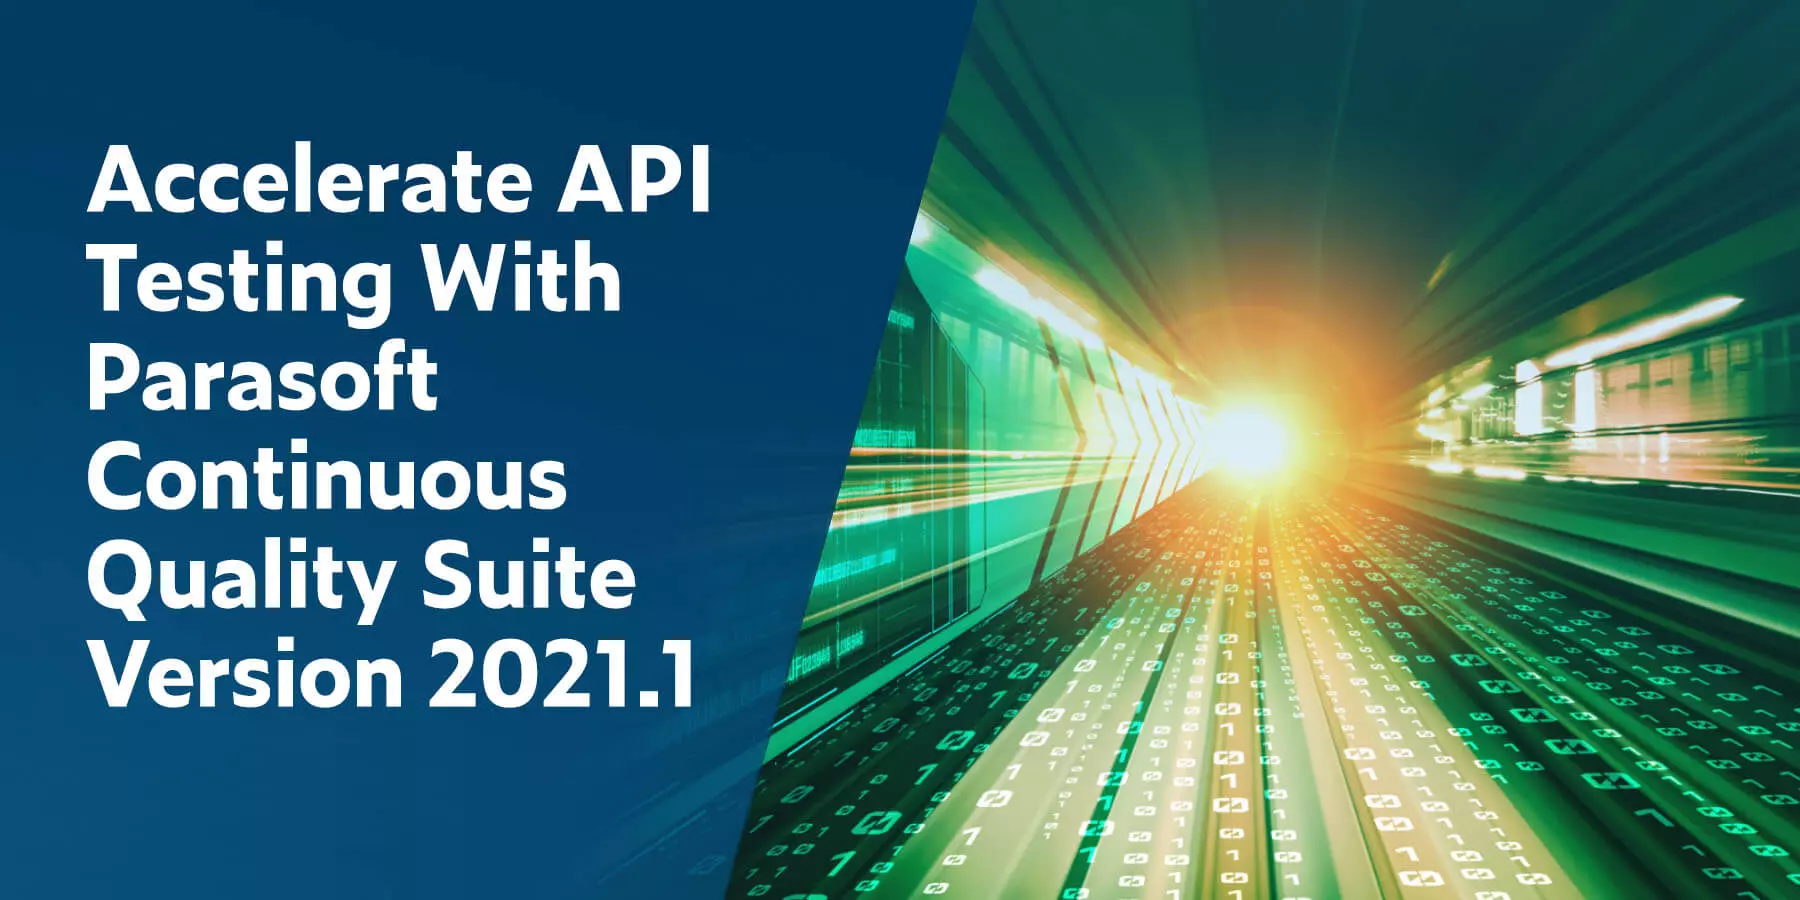 Accelerate API Testing With Parasoft Continuous Quality Suite Version 2021.1